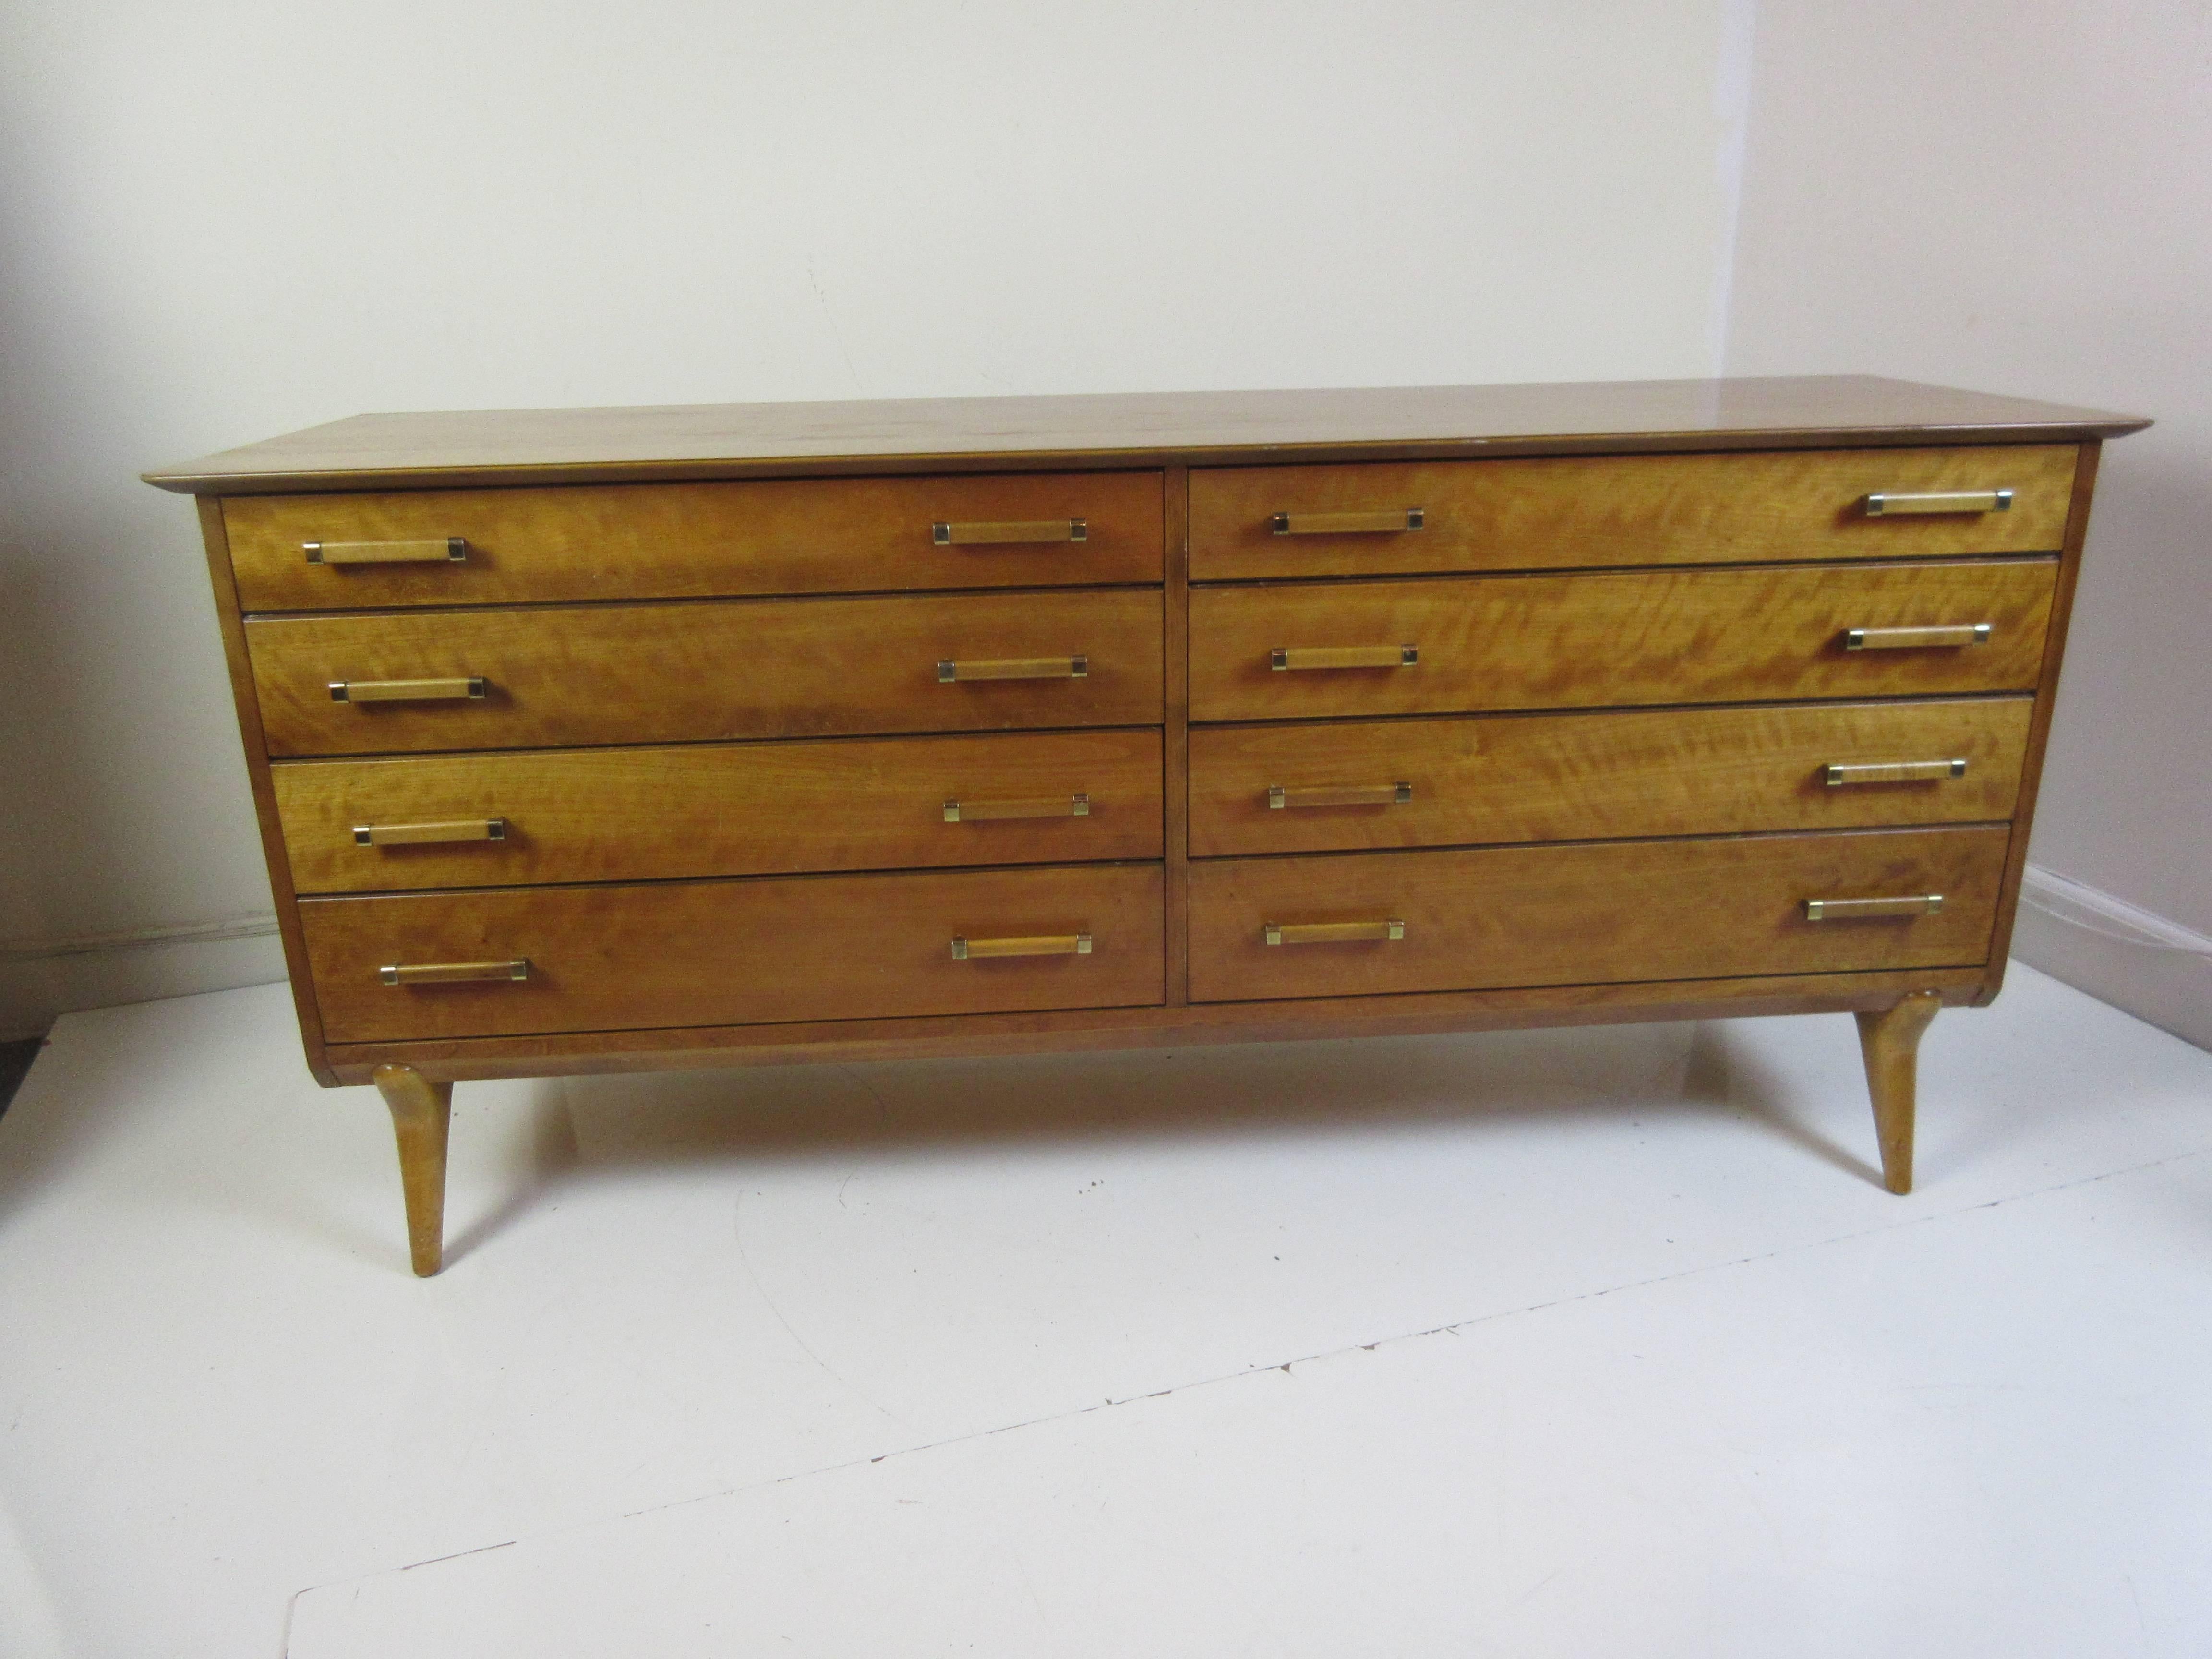 Renzo Rutili Johnson Furniture for John Stuart Dresser in a gleaming honey walnut with brass fittings on the pulls and Rutili's signature Italian style legs in contrasting birch. Top left drawer has branded John Stuart/Johnson Brothers mark and back